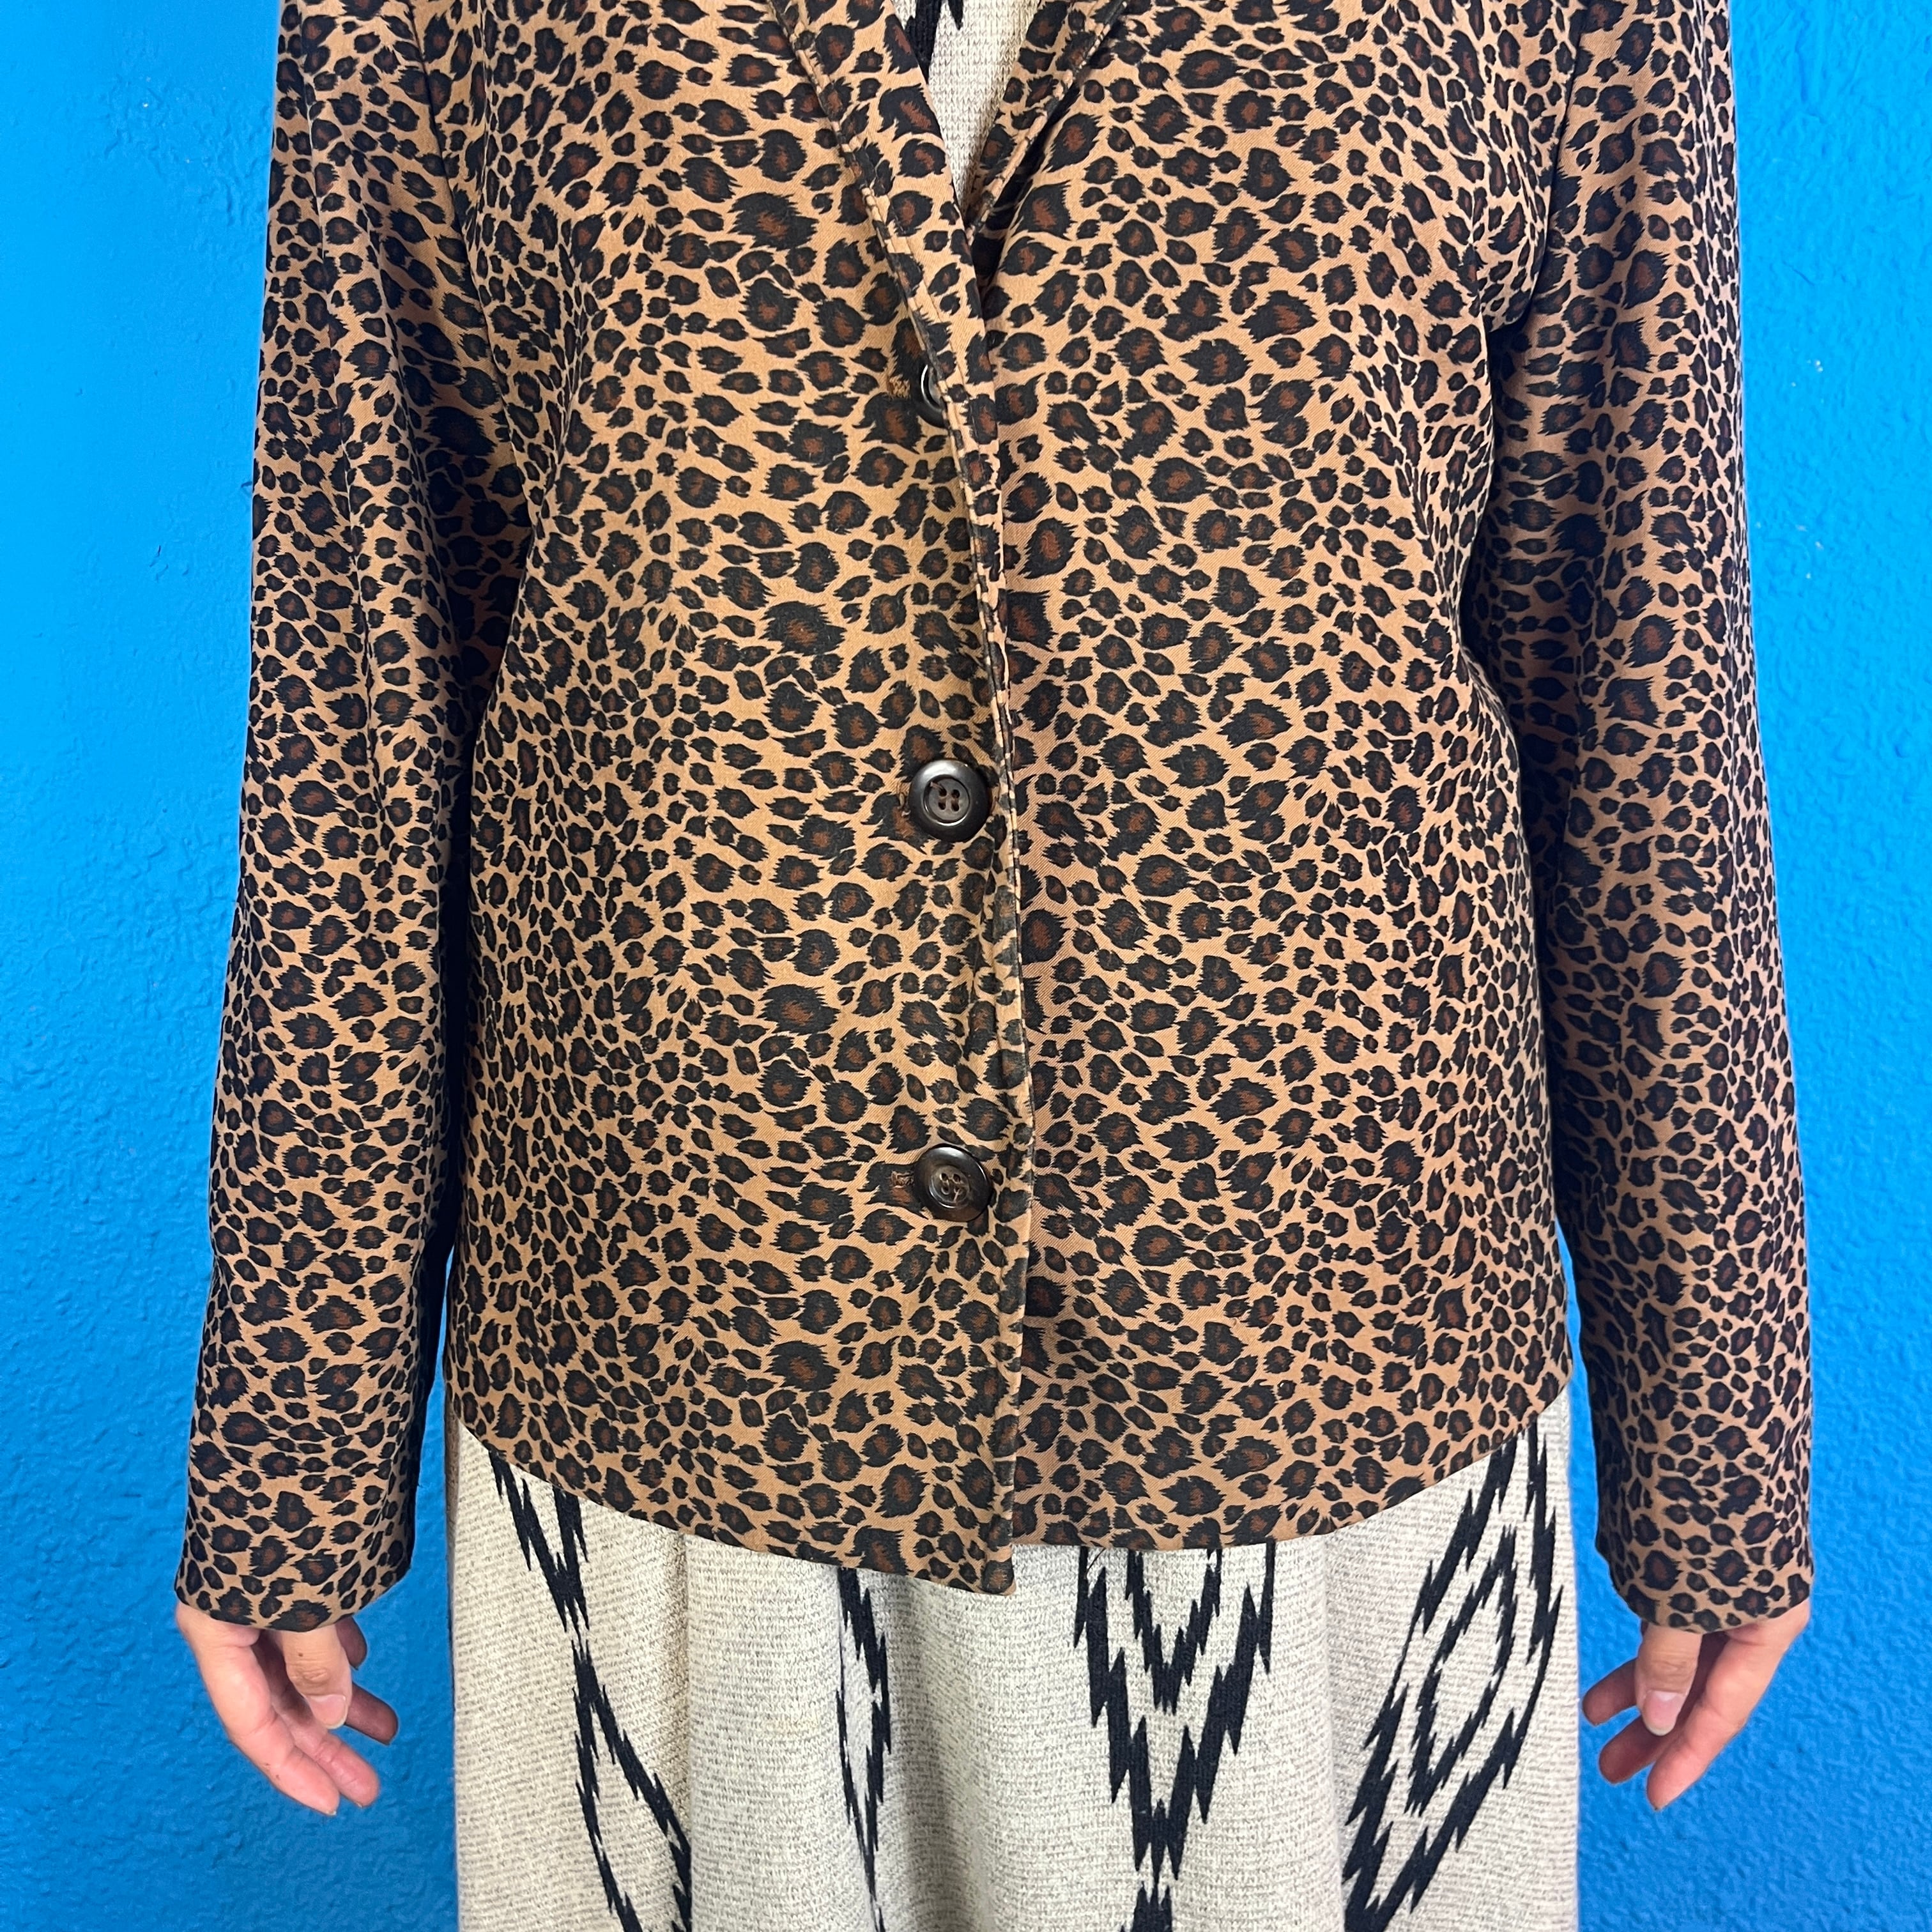 【Lady's】 90s Leopard Print Jacket / Made In USA レオパード ヒョウ柄 テーラード ジャケット  Vintage ヴィンテージ